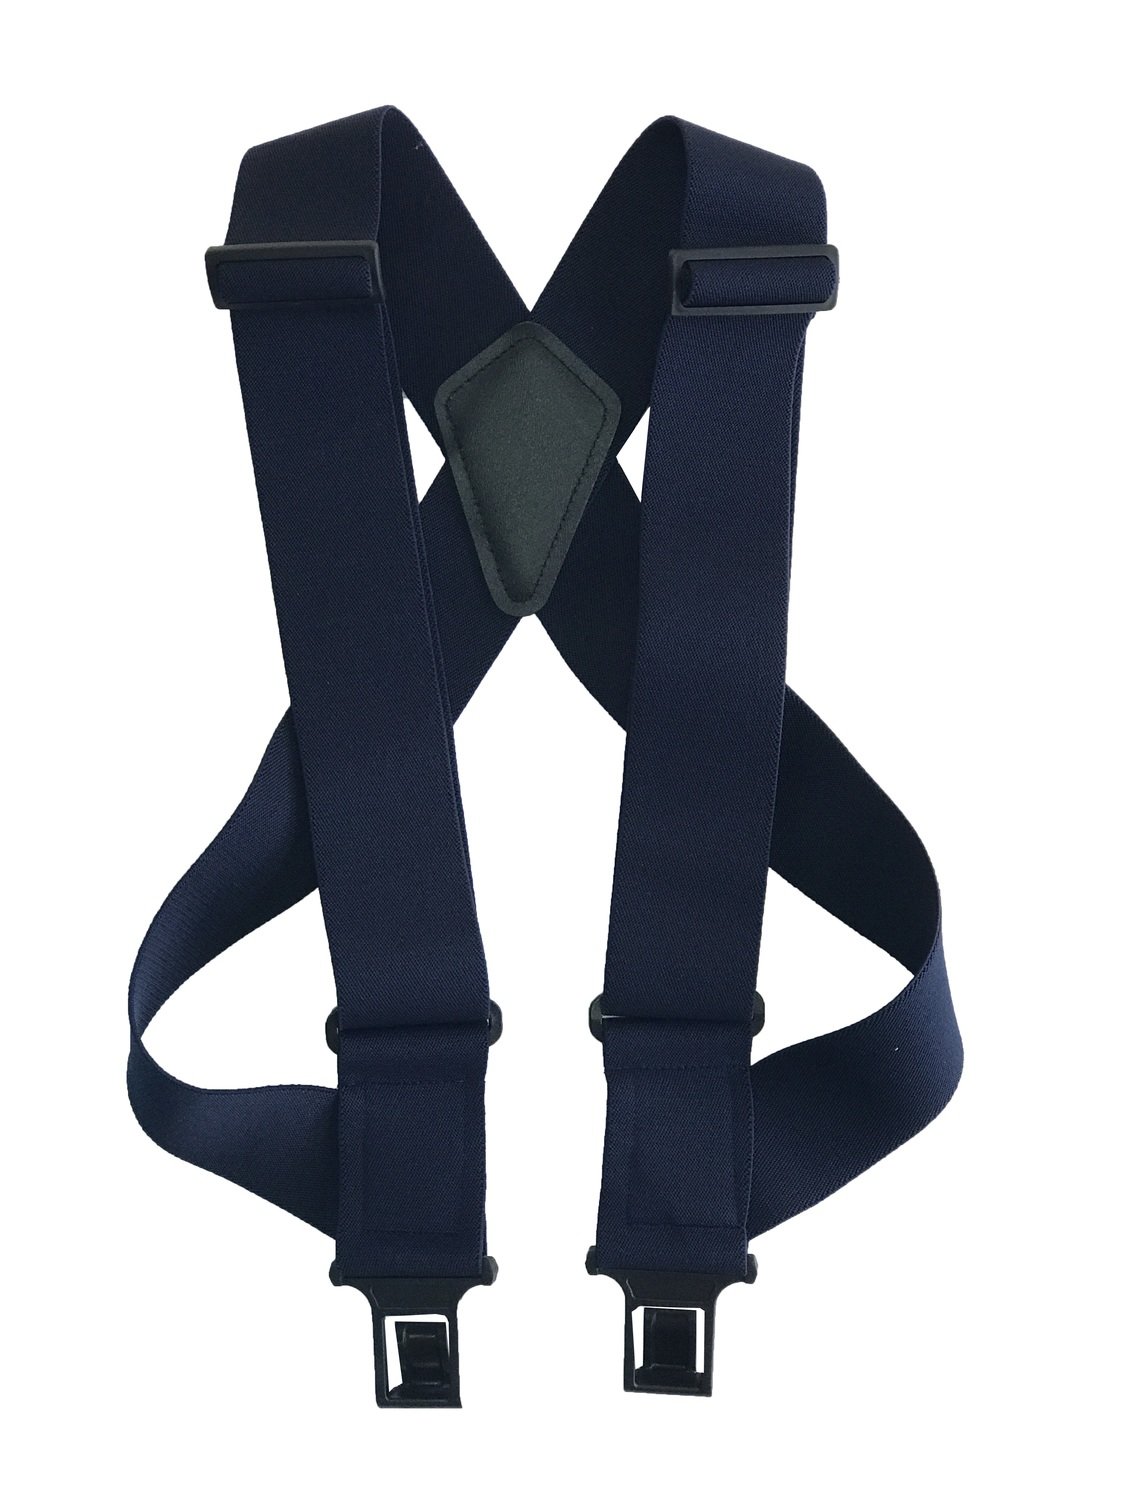 uBEE Perry Suspenders™ - Navy
1.5" and 2" widths available